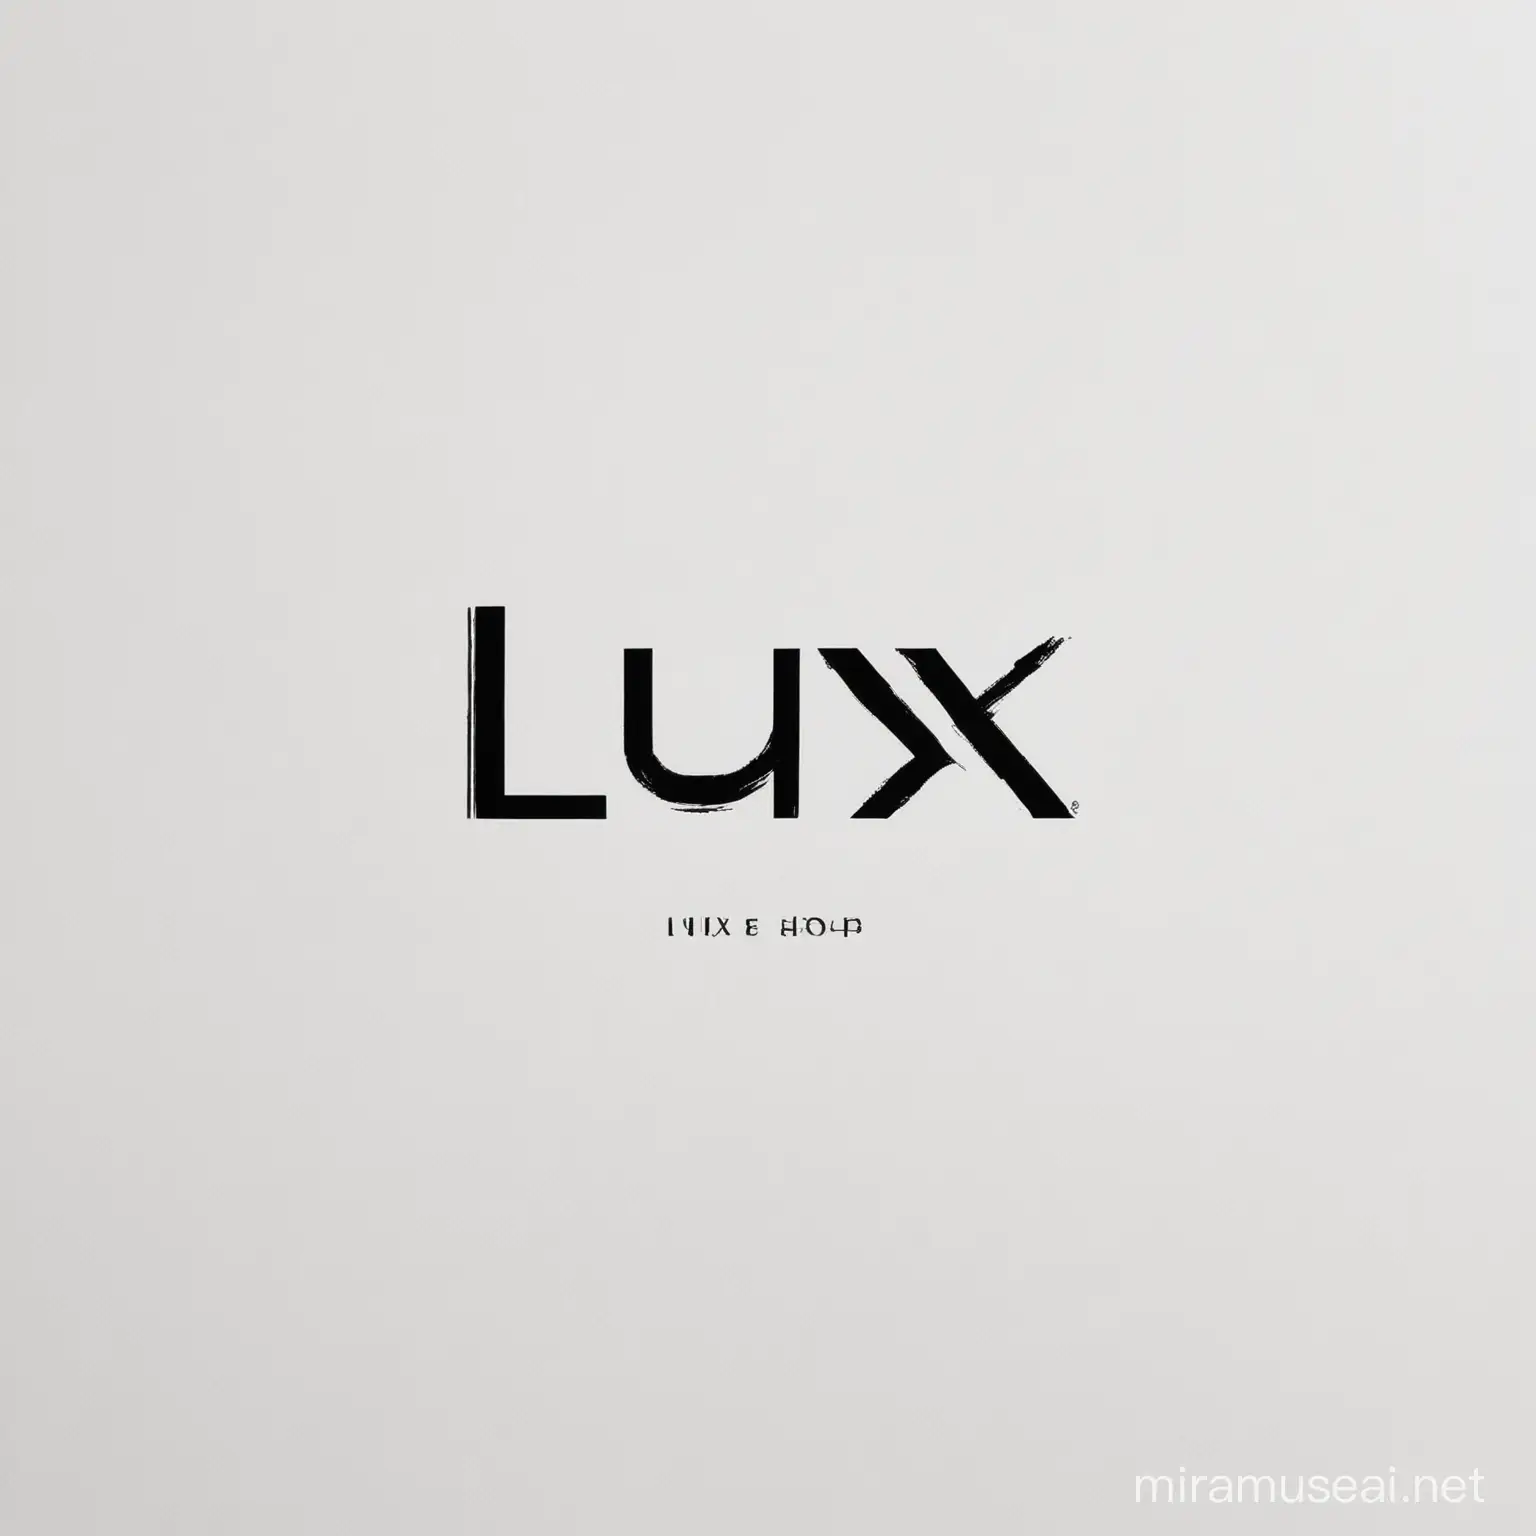 Minimalistic Black Type Logo for LUX Shop Clothing Brand